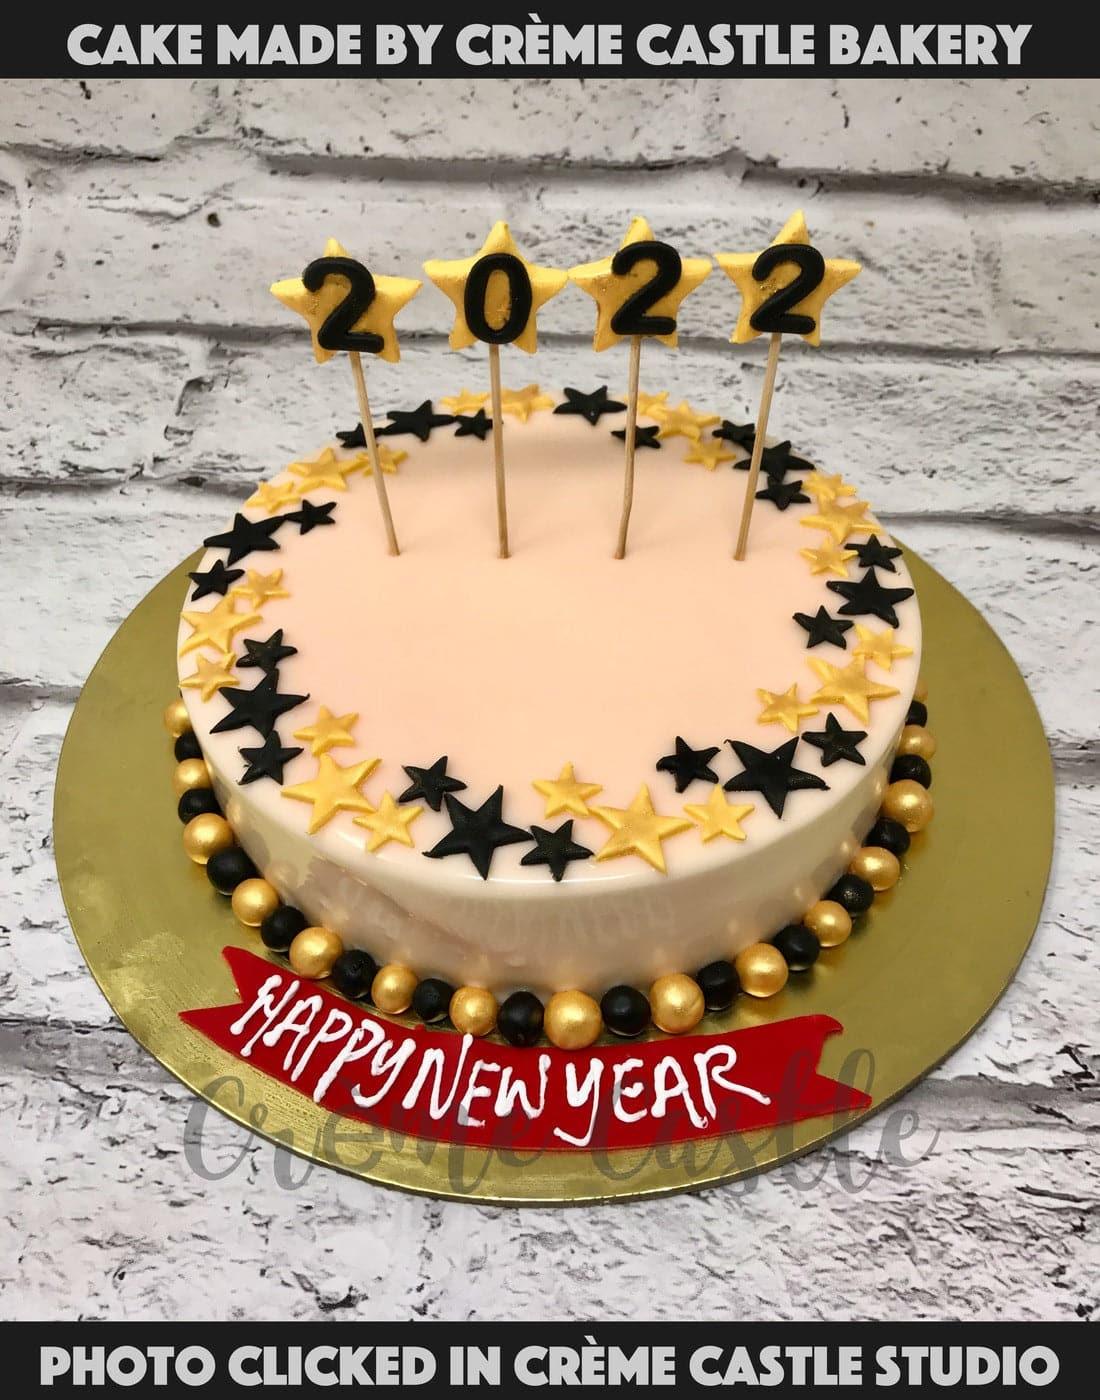 New Year Cheer Cake - Creme Castle